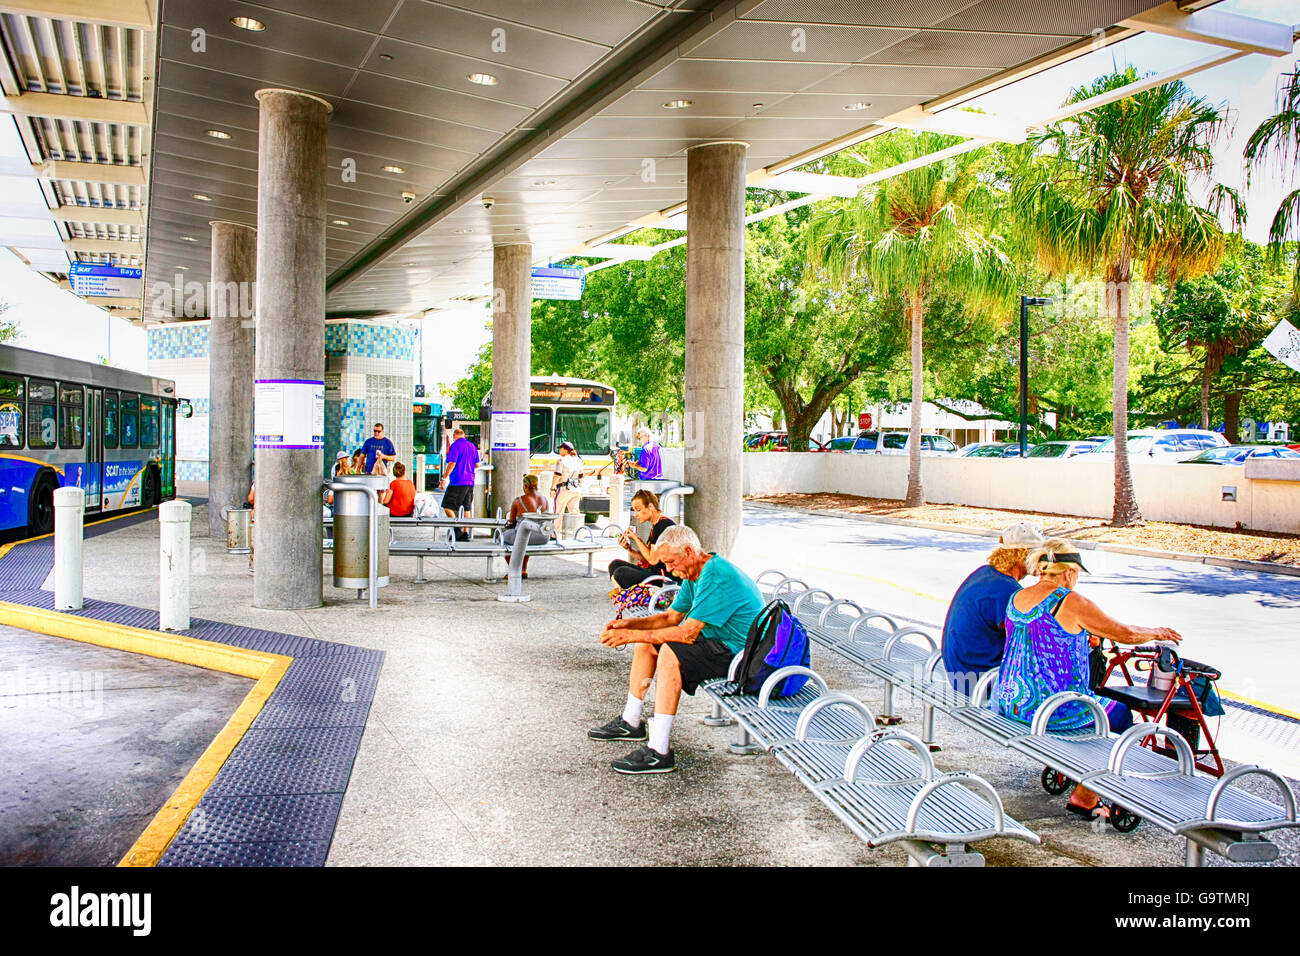 People at the bus Station on downtown Sarasota, FL Stock Photo